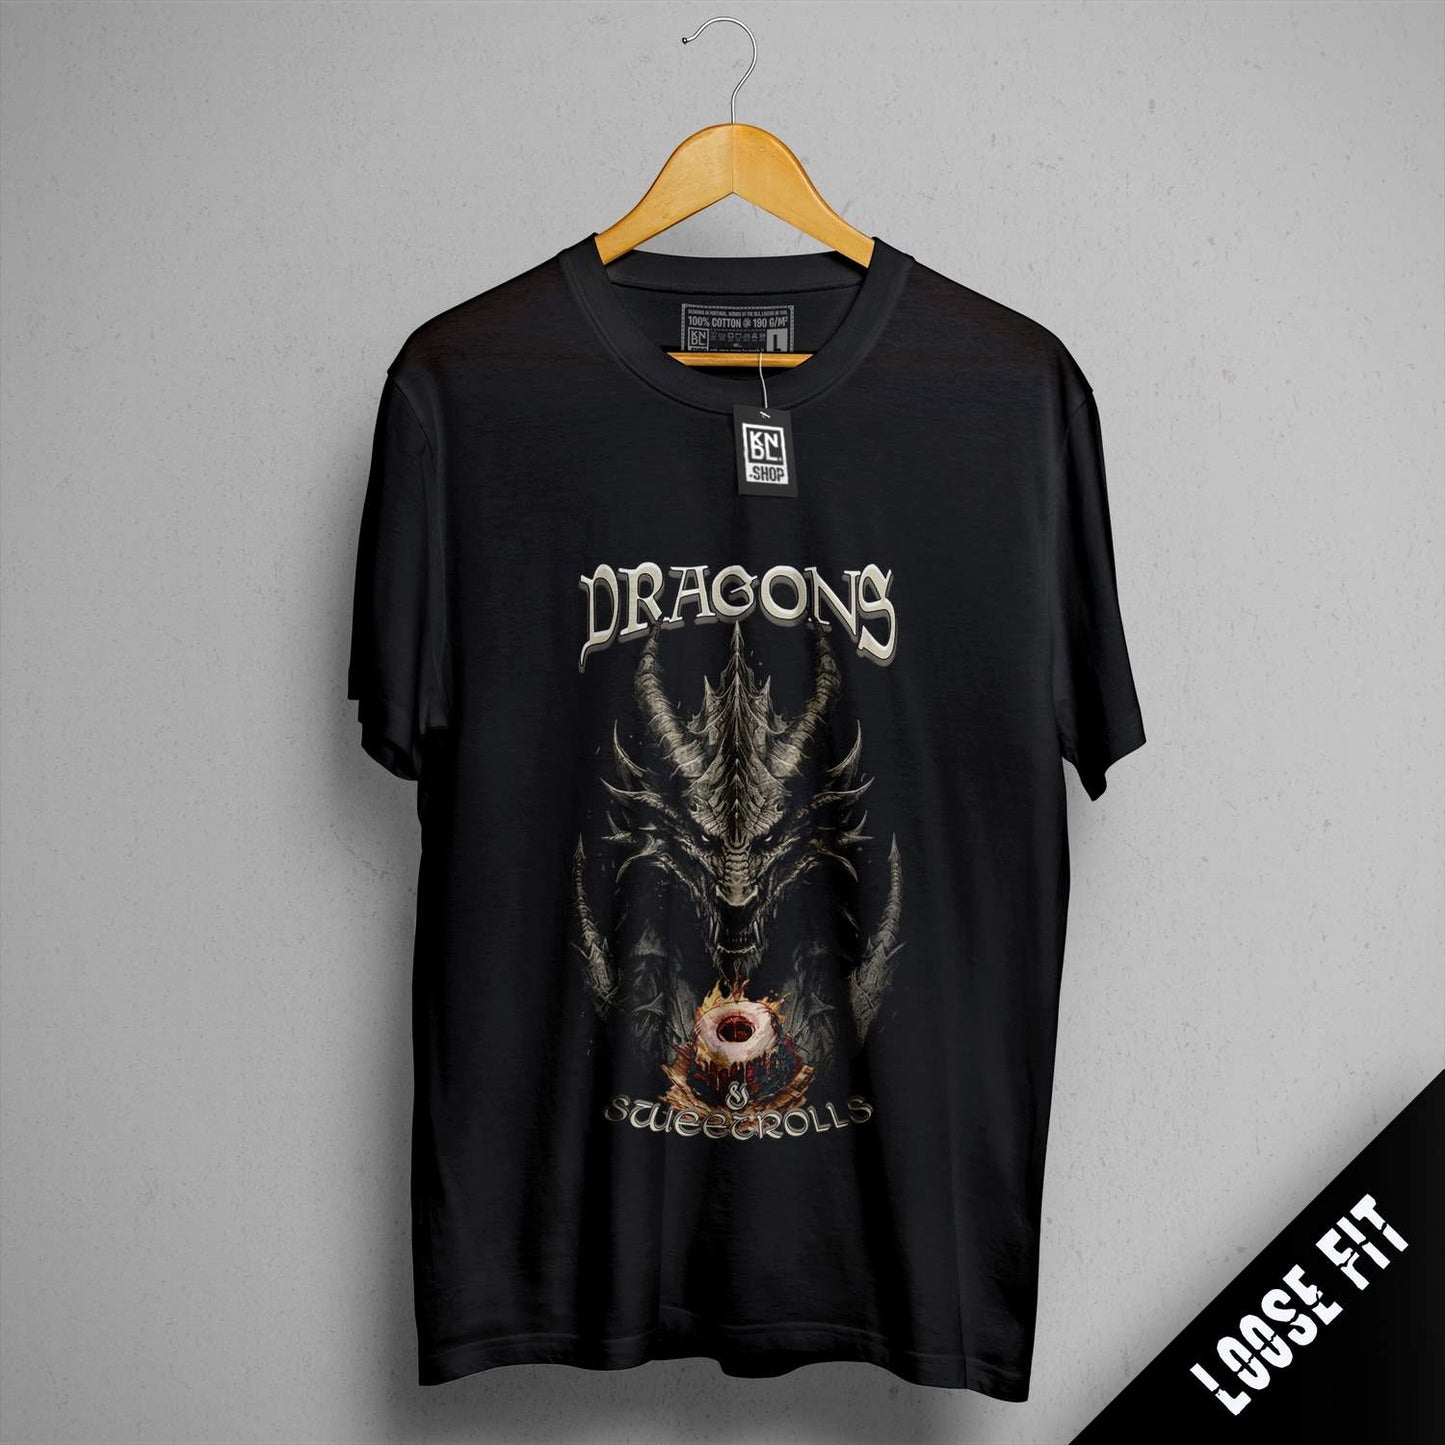 a black shirt with a picture of a dragon on it